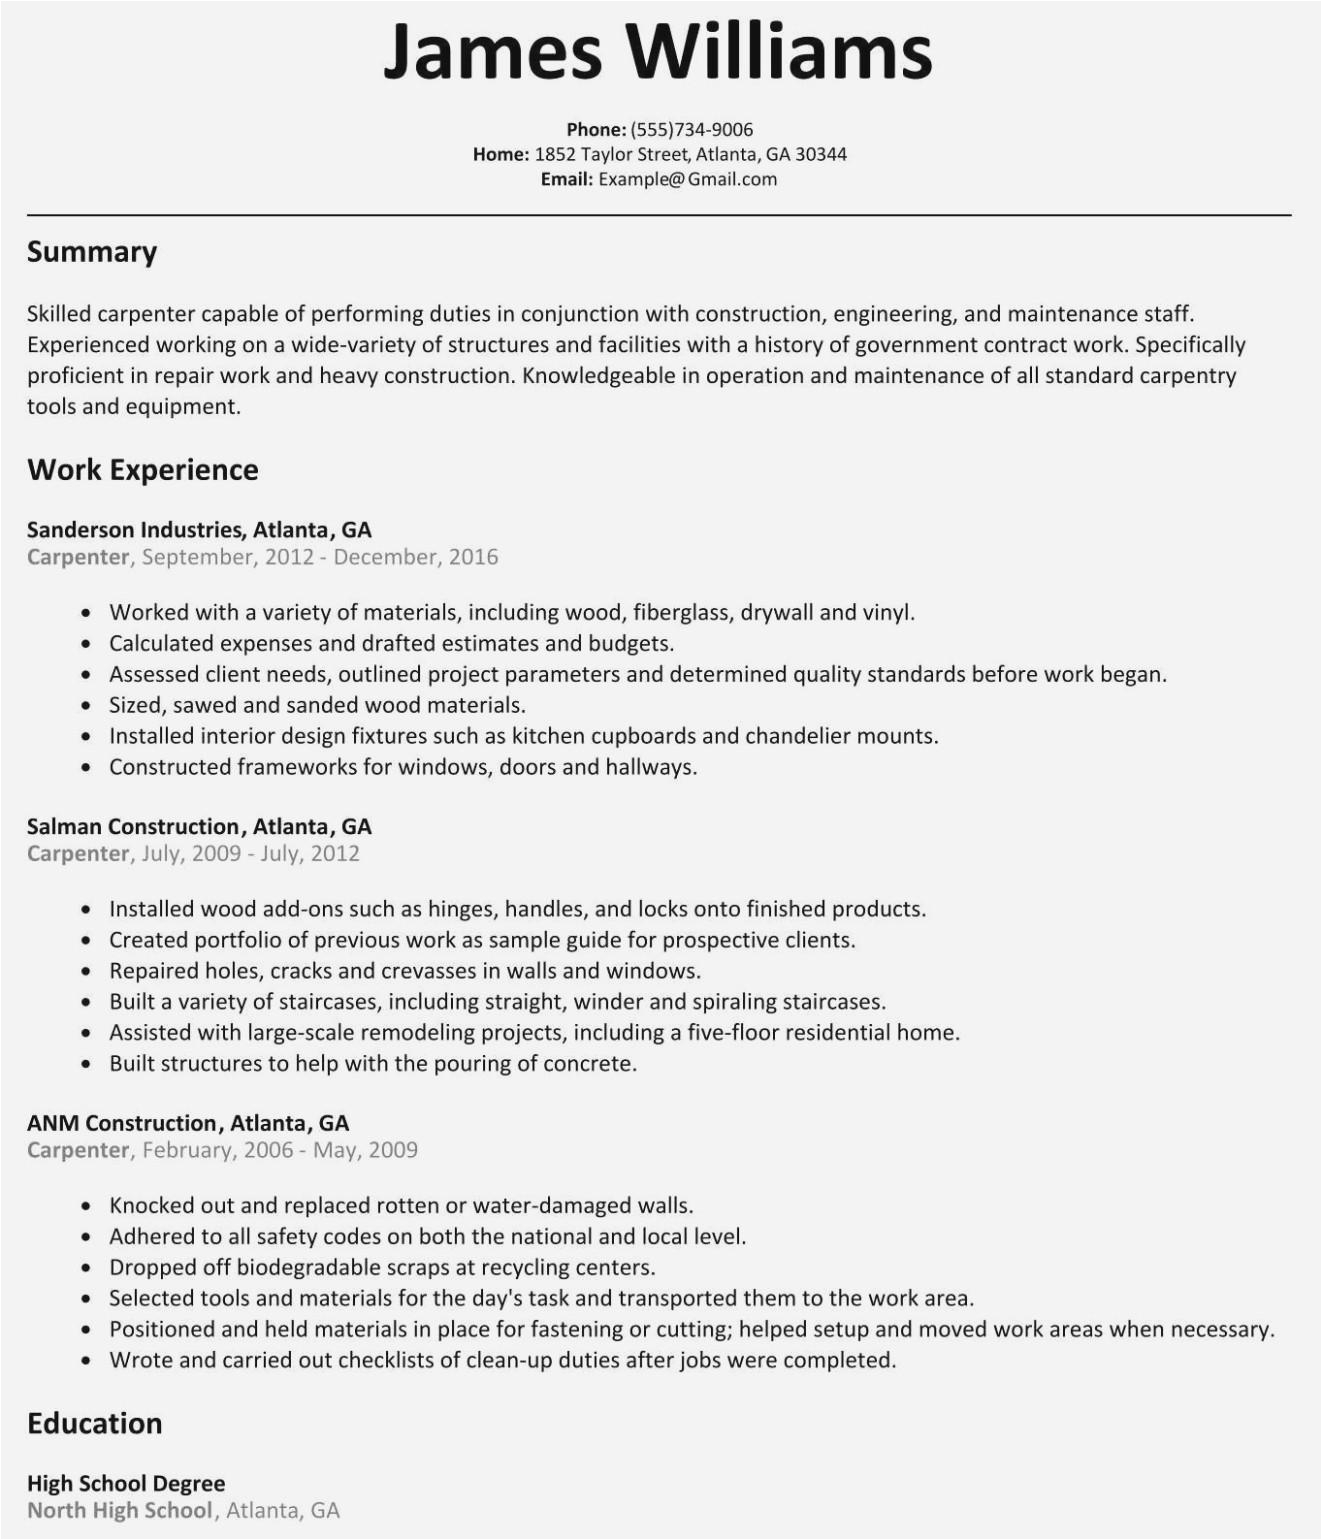 Sample Resume for Retired Person Returning to Work 91 New Sample Resume for Retired Person Returning to Work